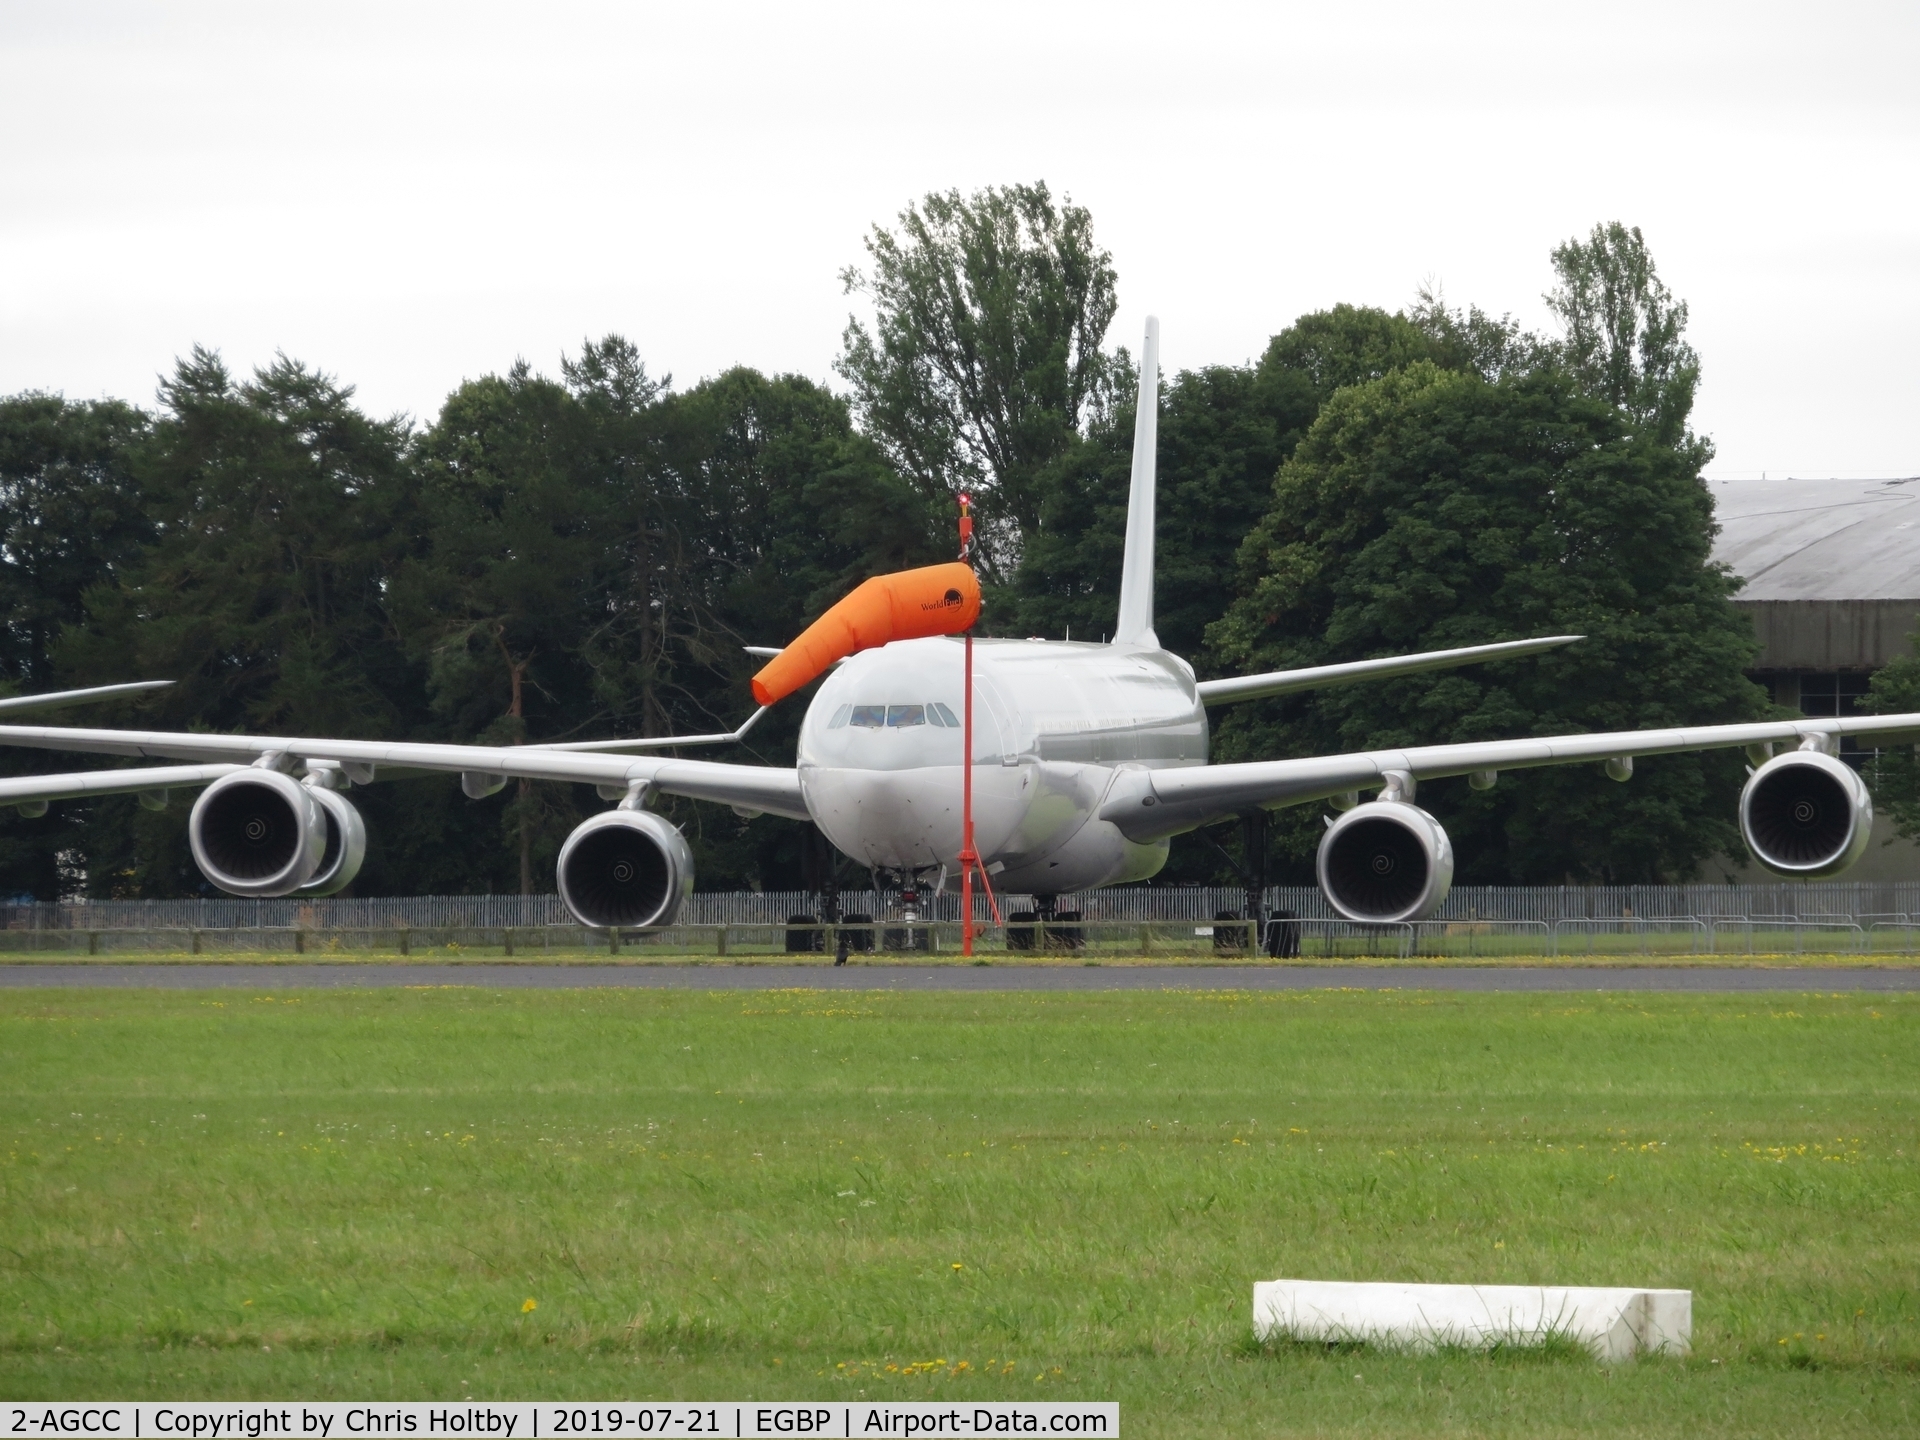 2-AGCC, 2006 Airbus A340-642 C/N 766, ex-Qatar Airways Airbus A340 built in 2006 now at Kemble for scrapping for parts.